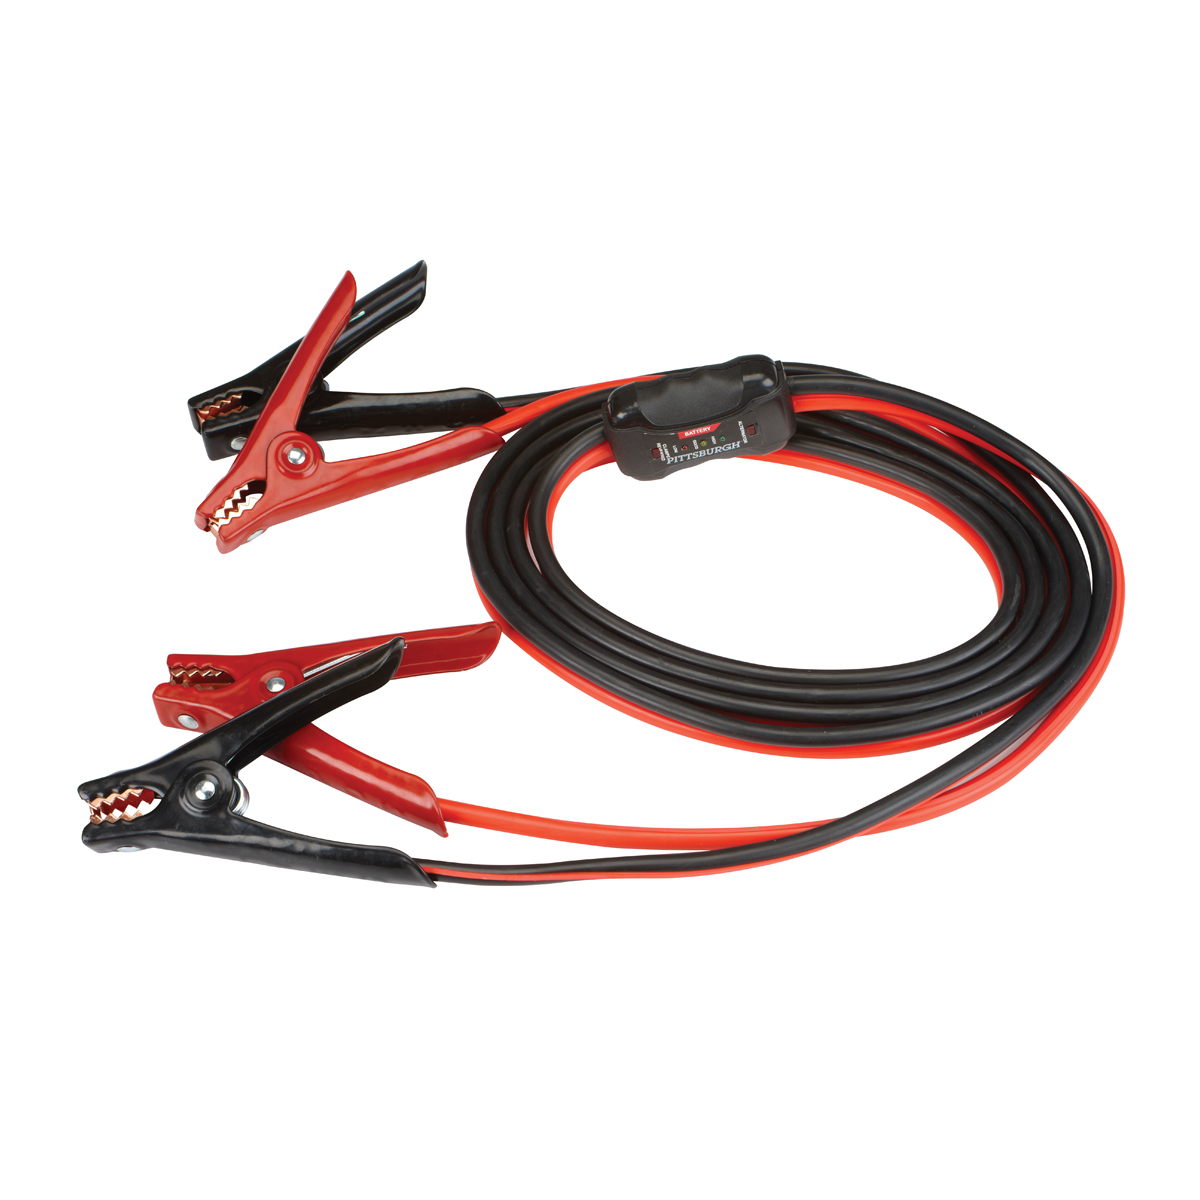 PITTSBURGH AUTOMOTIVE 12 ft. 8 Gauge Heavy Duty Jumper Cables with Inline Battery Tester - Item 60278 / 68701 / 93633